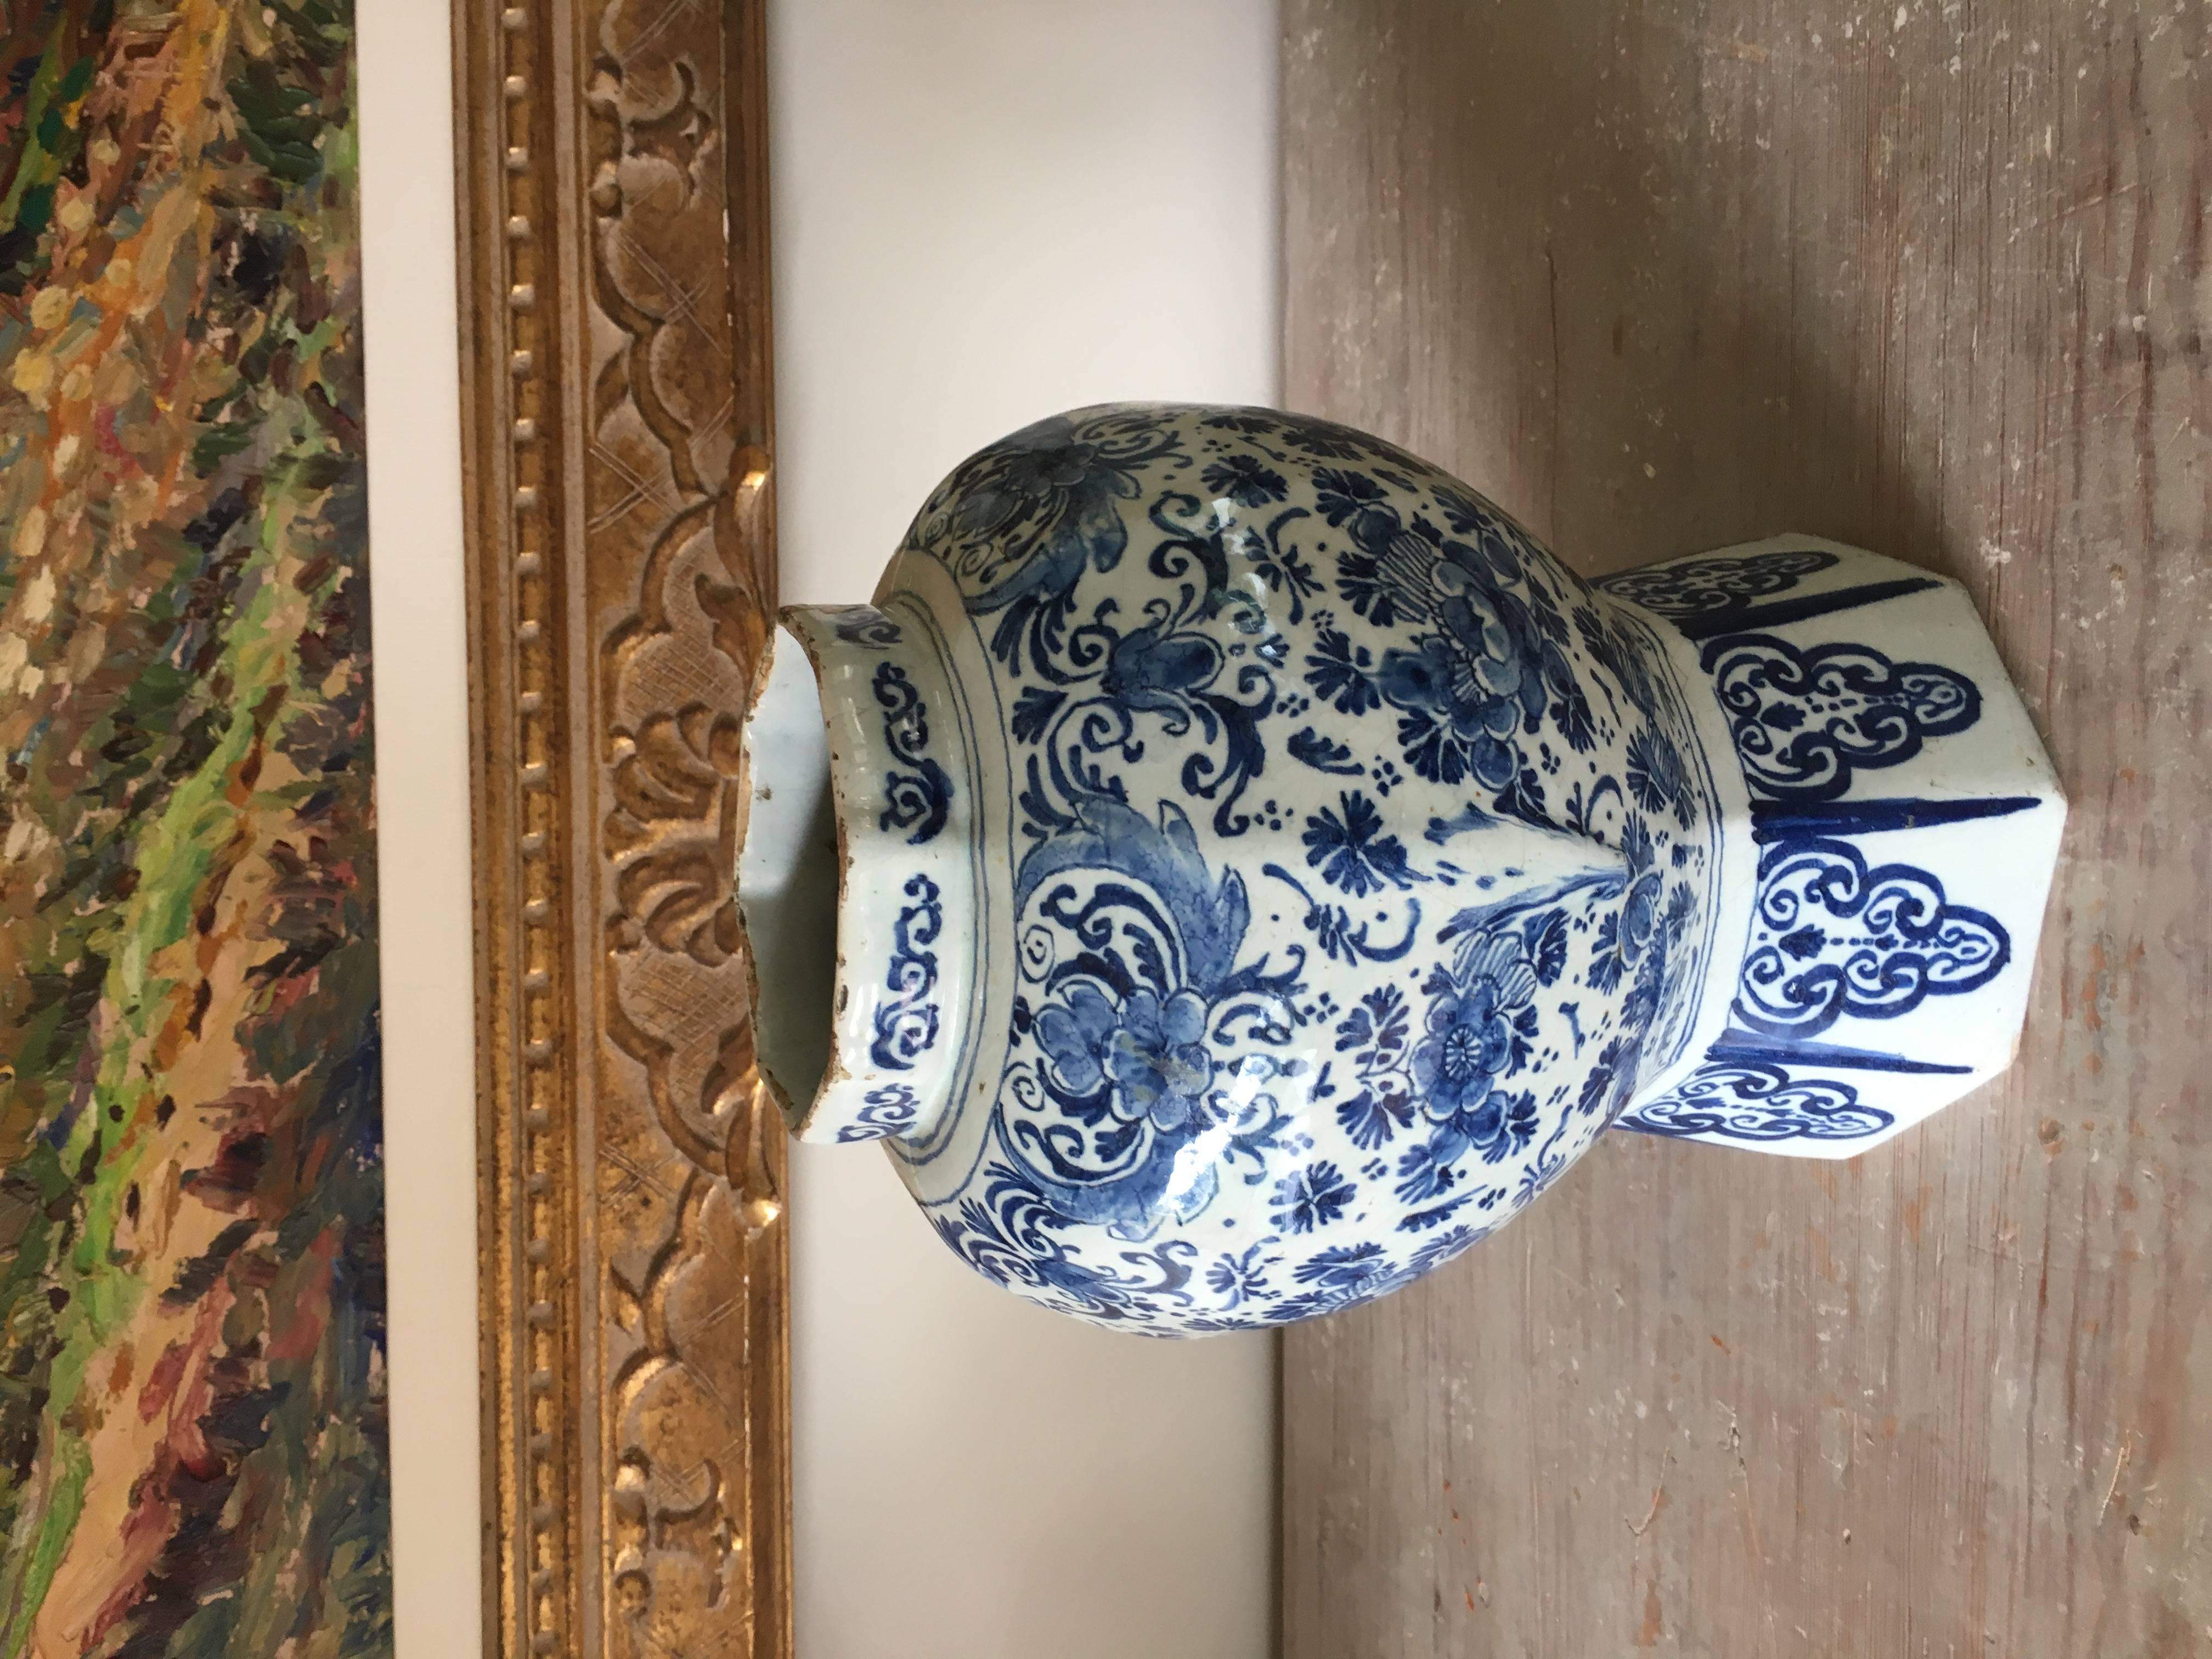 18th century delft Dutch vase. Beautiful variations of blue in a floral design. Lovely curved shape over octagonal foot. Nice large size.